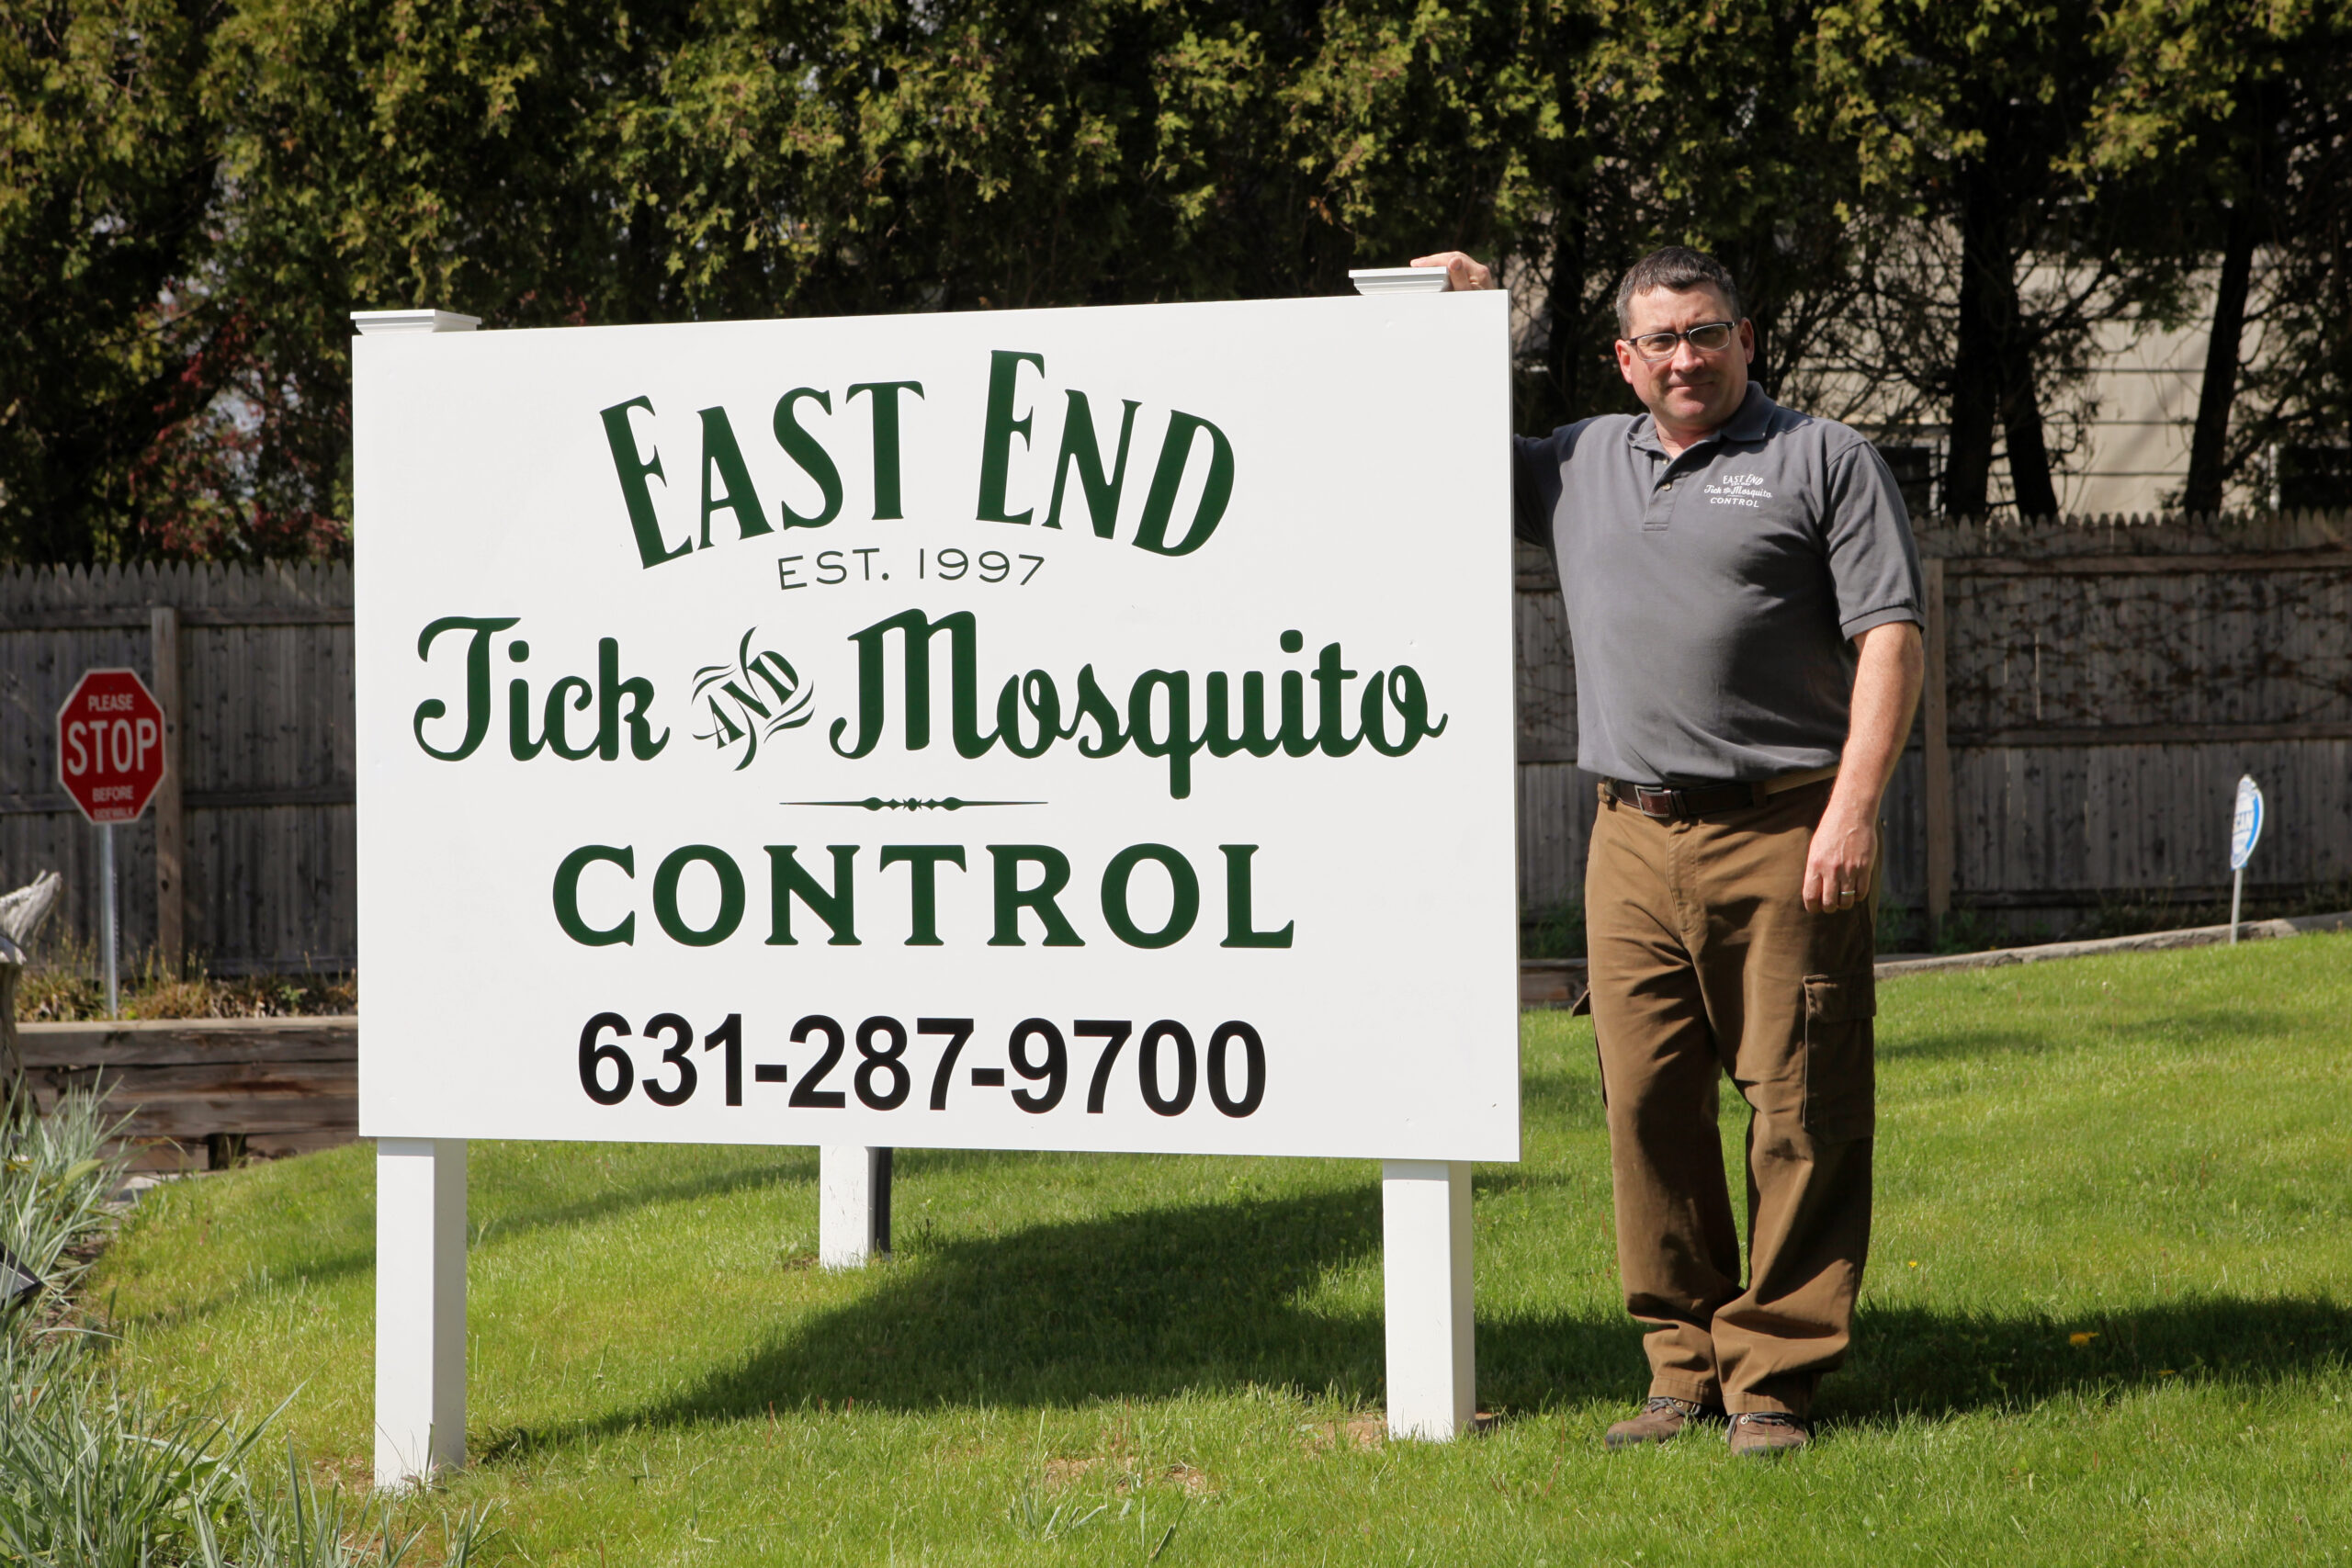 Brian Kelly, owner of East End Tick & Mosquito Control.